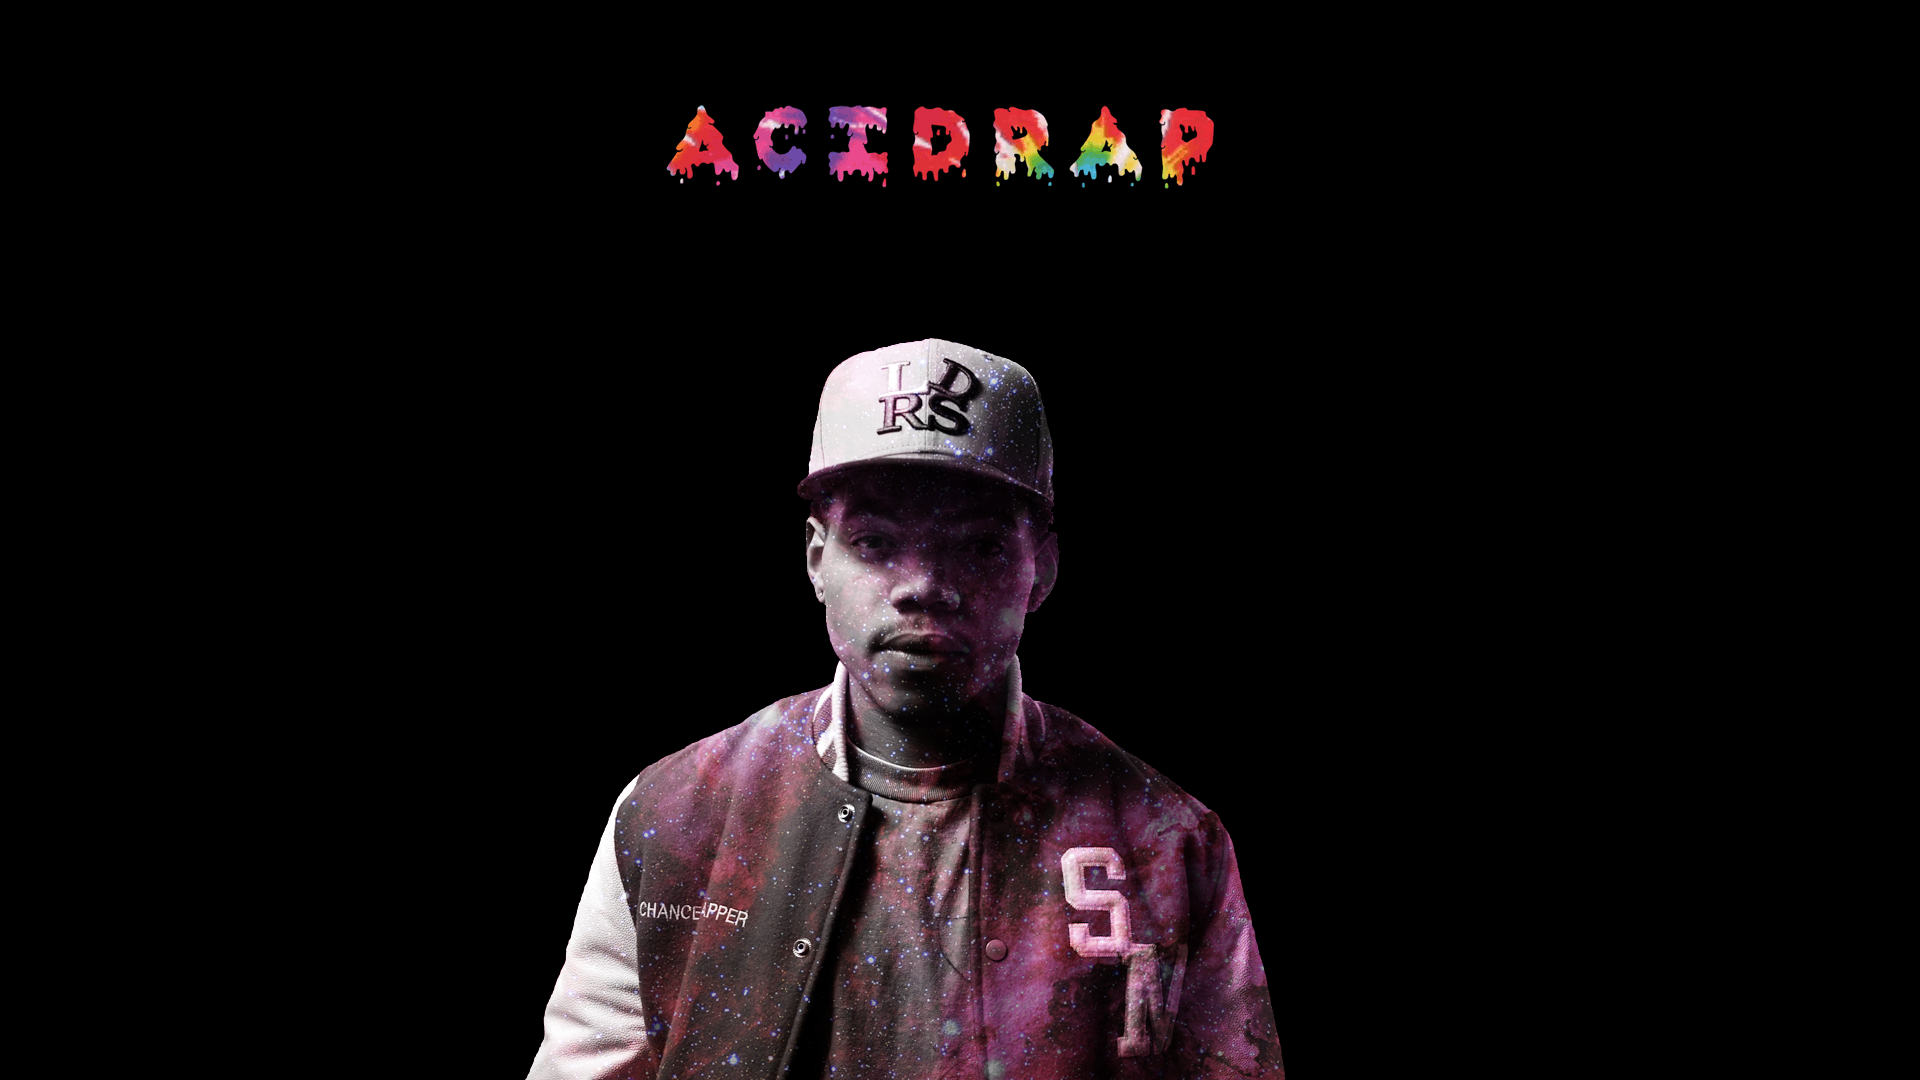 Chance The Rapper Full HD Wallpaper and Background